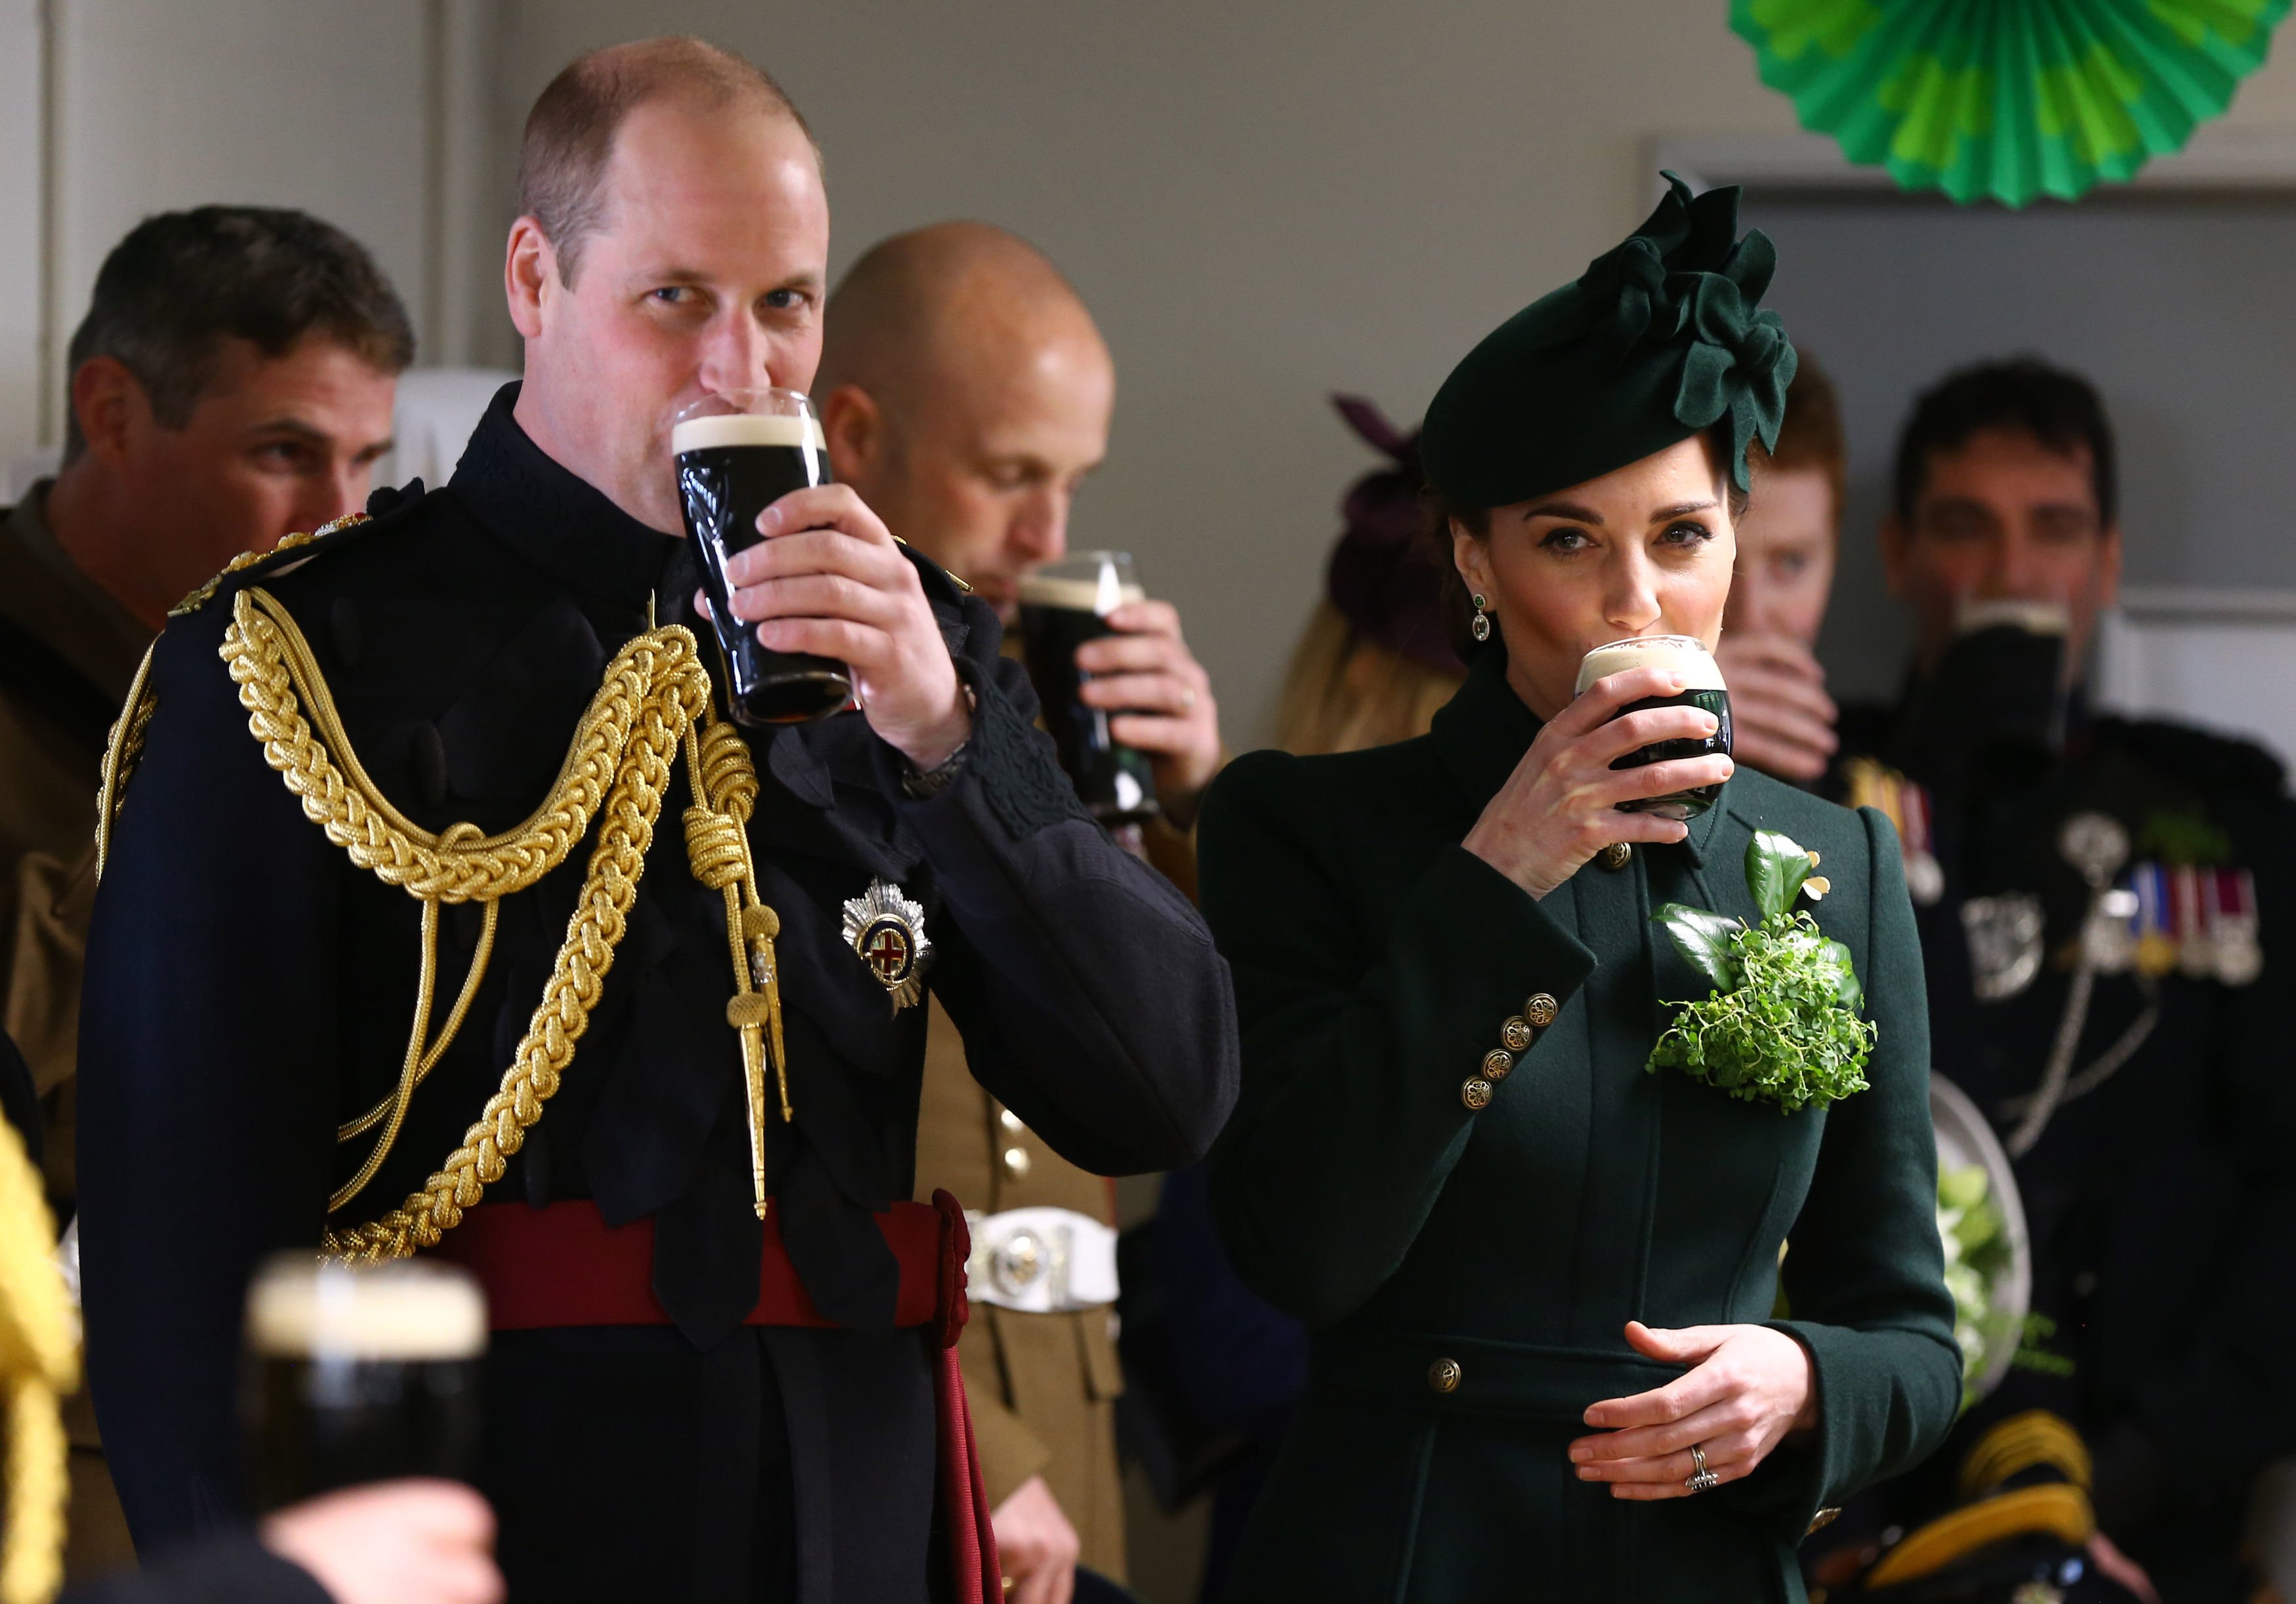 Prince William and Kate Middleton meets with Irish Guards after attending the St Patrick's Day parade at Cavalry Barracks in Hounslow on March 17, 2019 in Hounslow, England | Photo: Getty Images